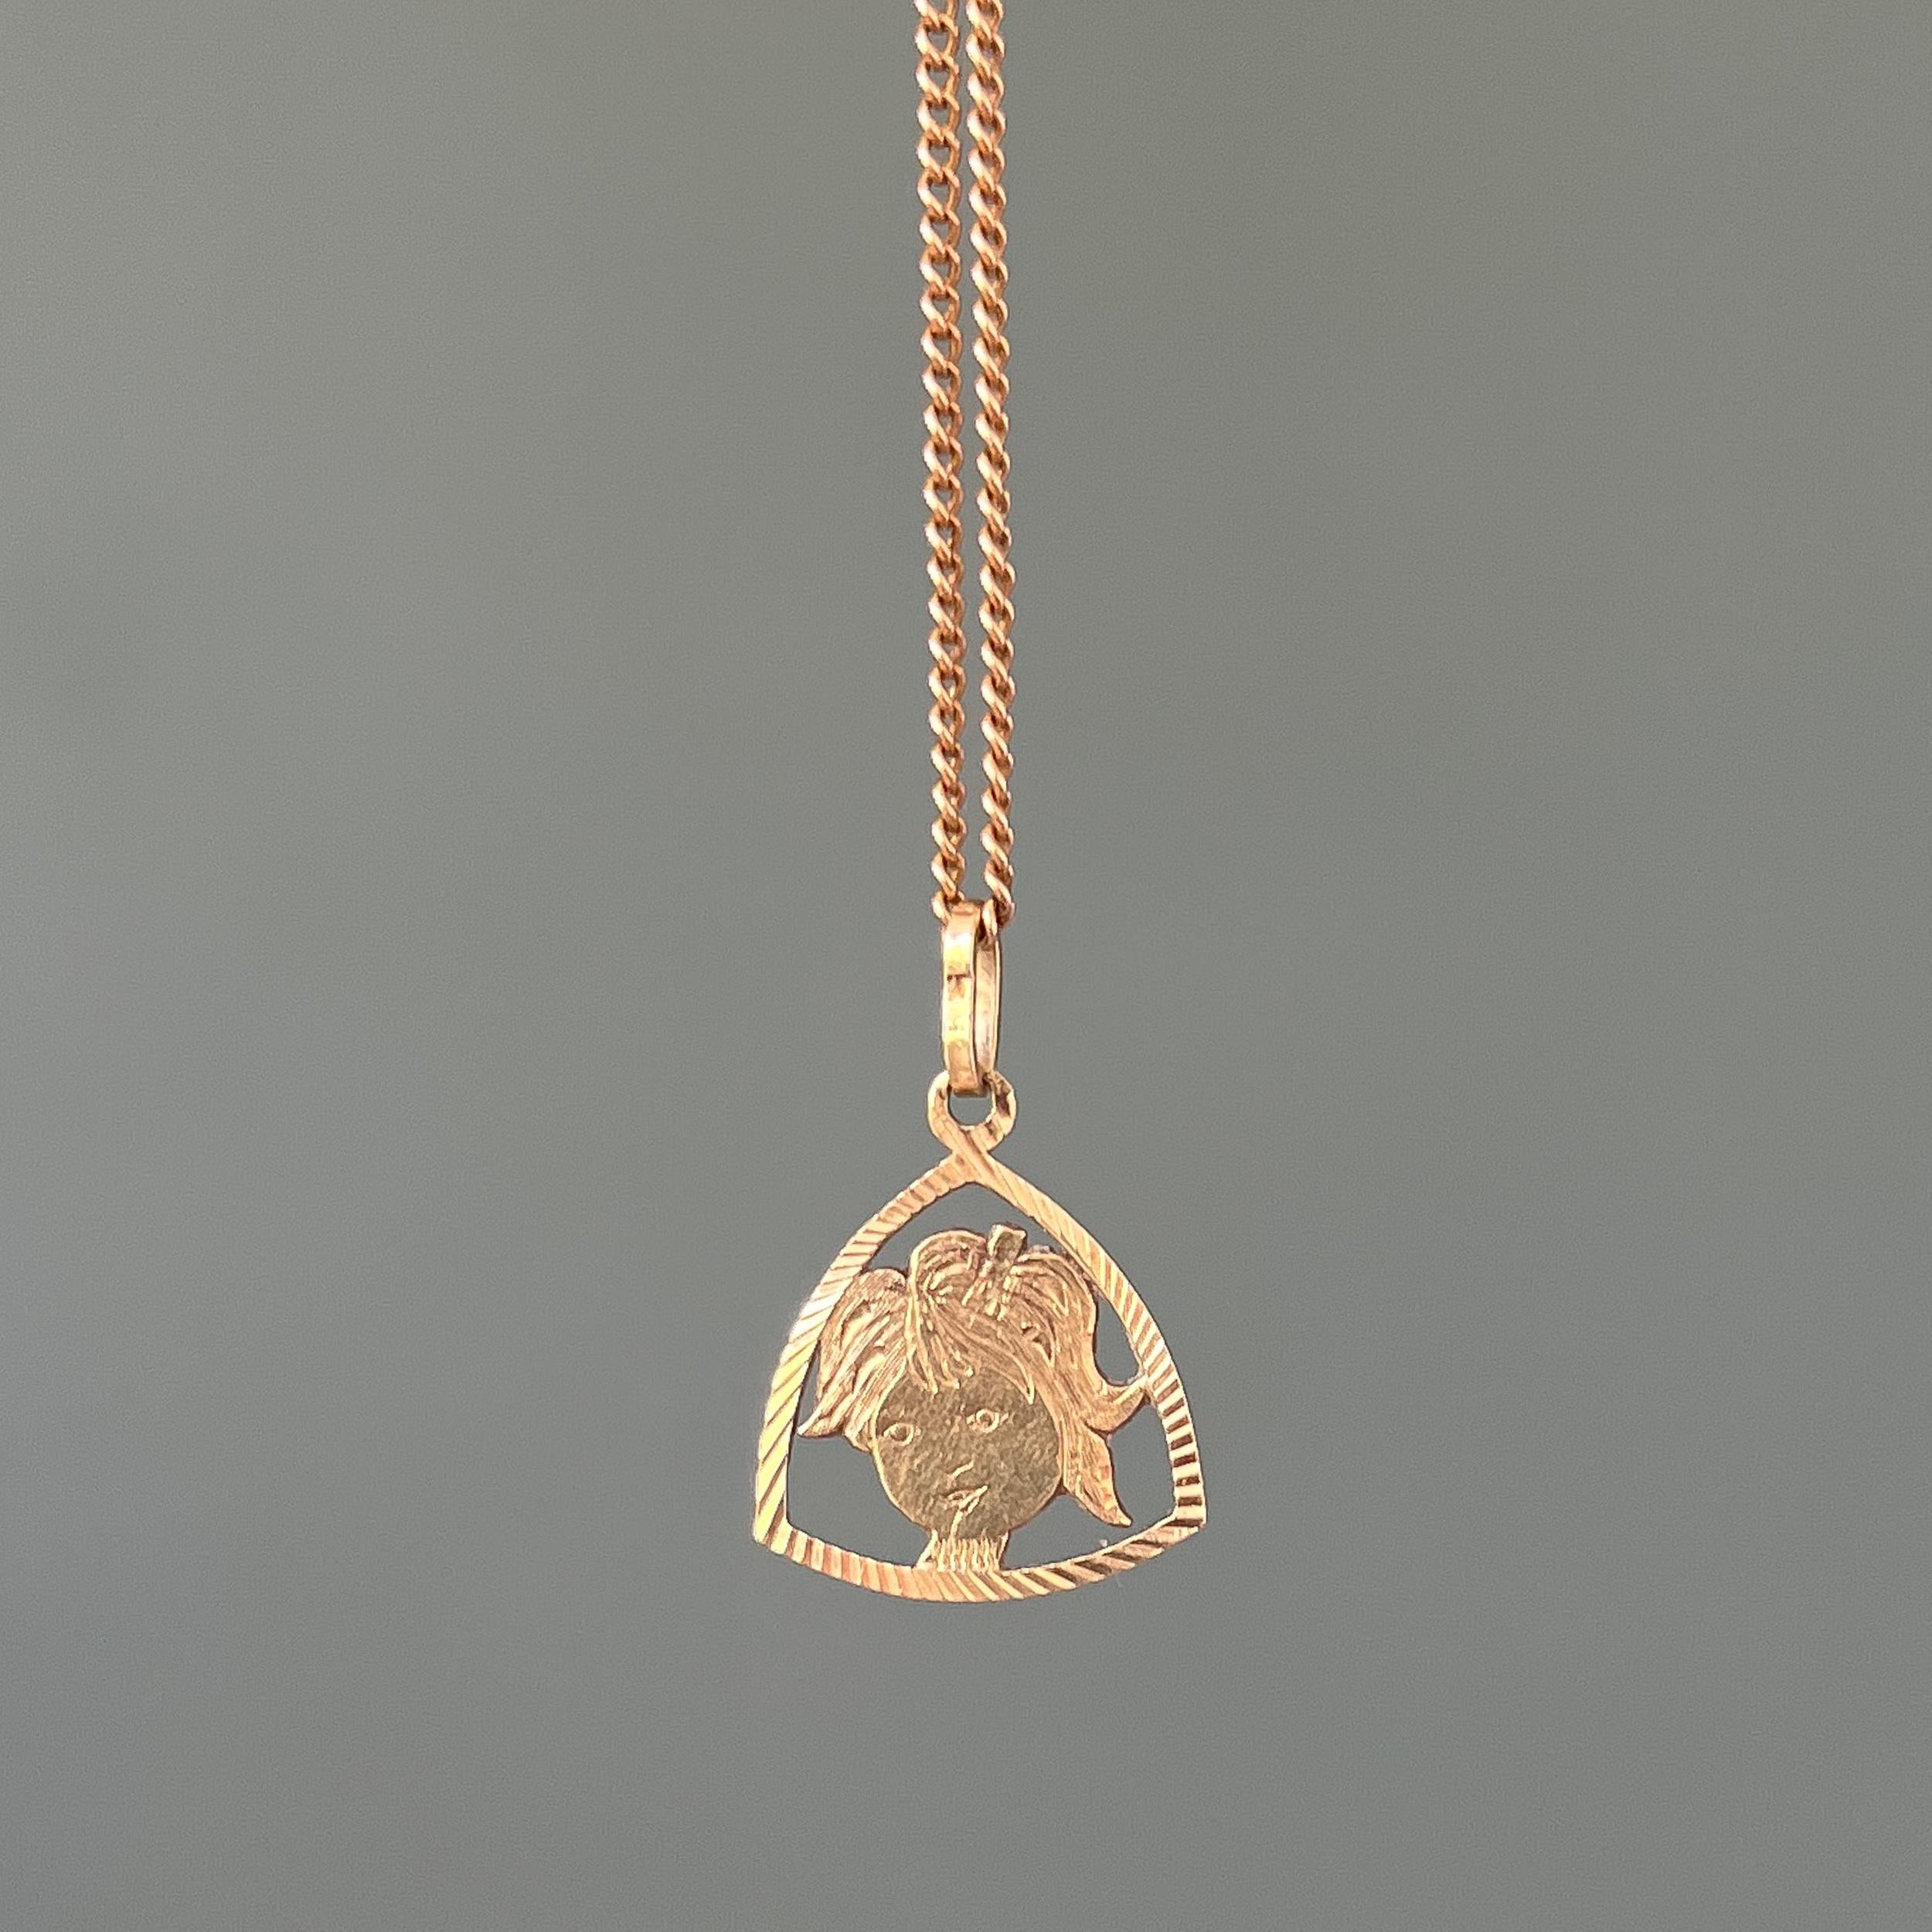 A charm pendant depicting a girl in a 14 karat gold stirrup frame. This vintage charm has a beautiful design with engraved grooved details on the border. The little girl has a lovely smile on her face and a bow wrapped in her hair.

Charms are great